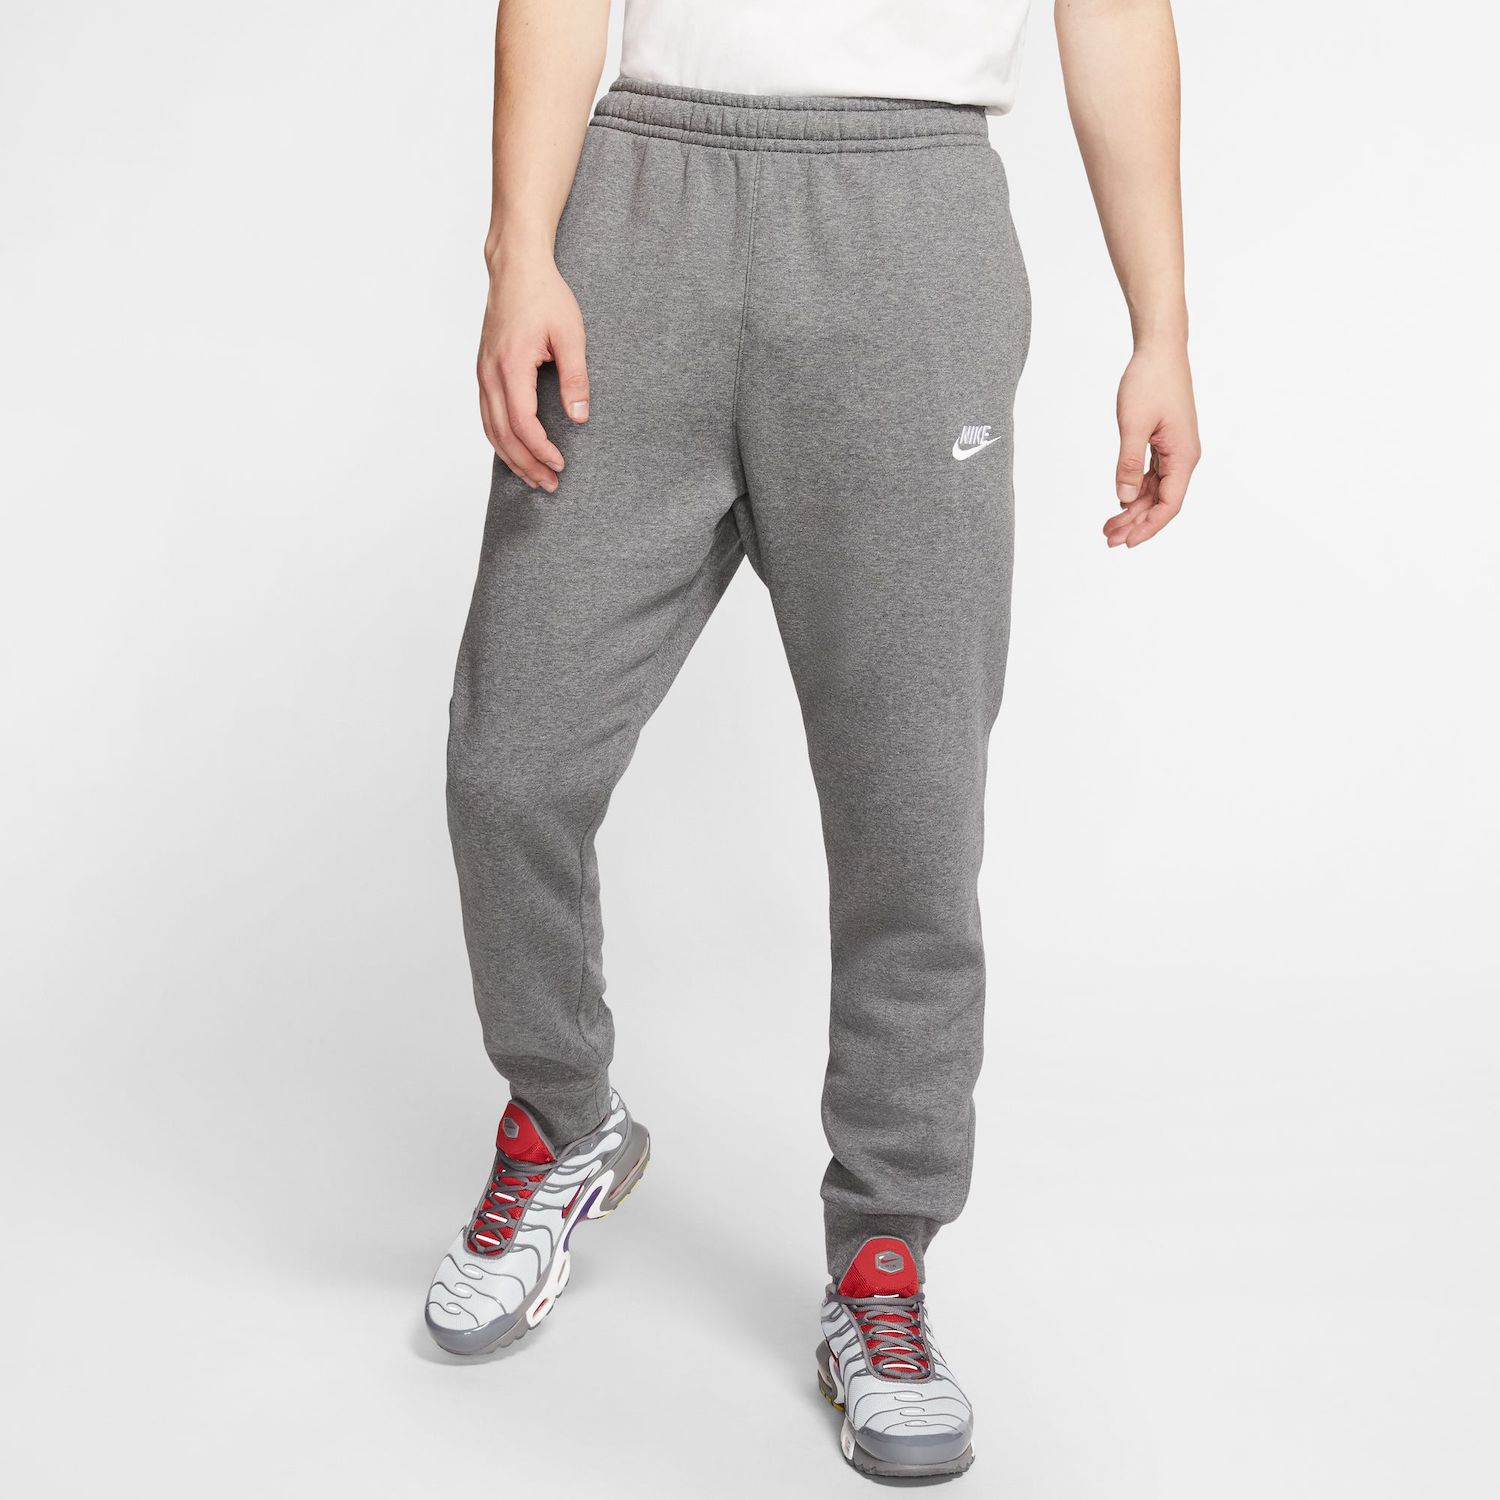 black and grey nike joggers